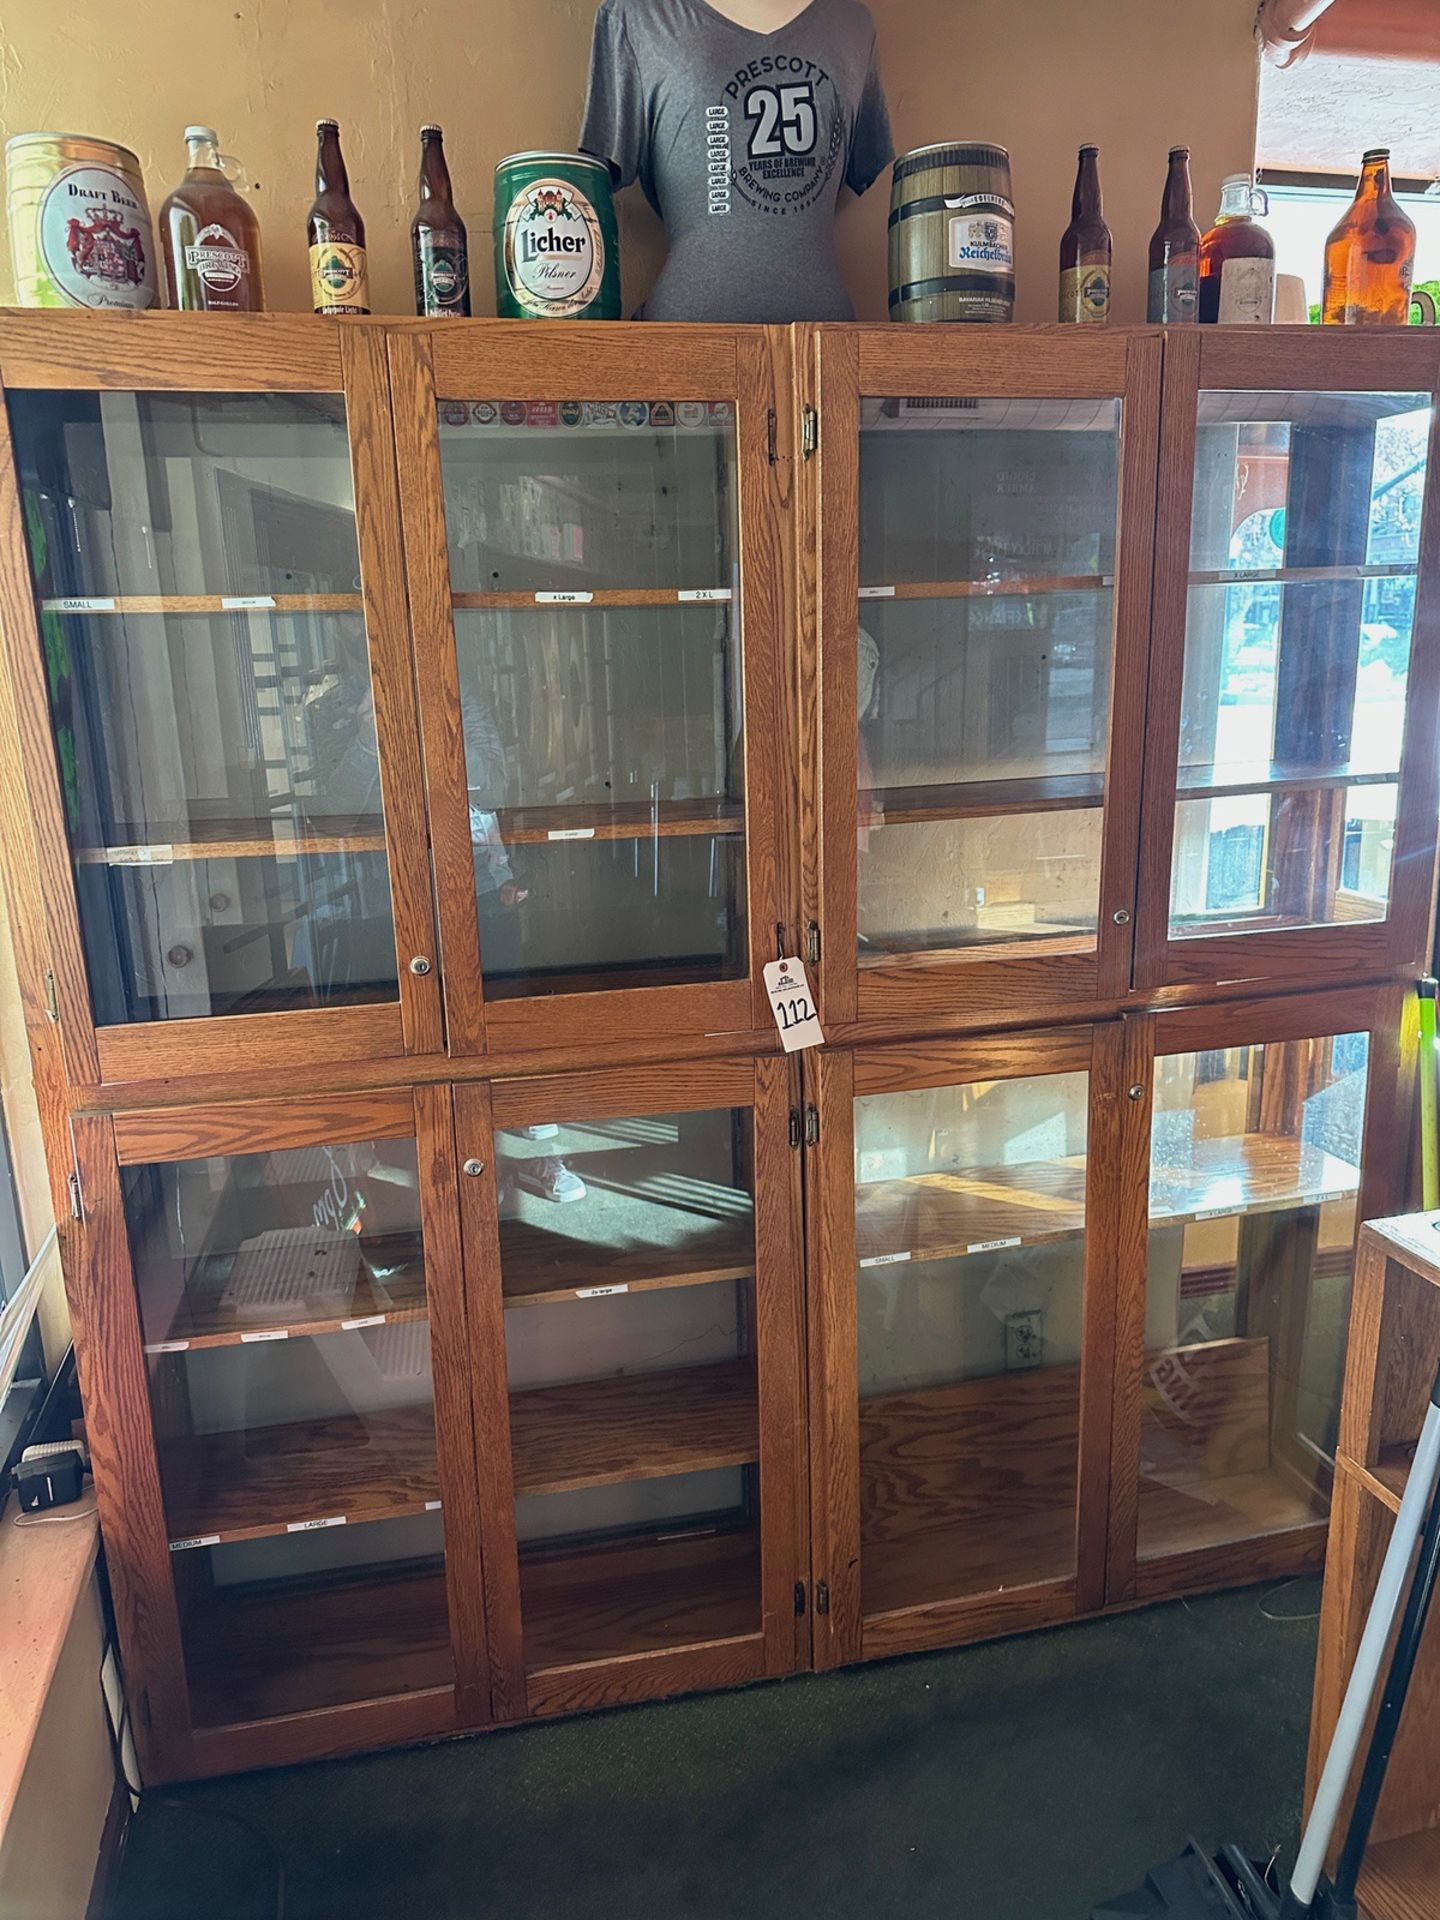 Lot of Glass Display Cases (1' x 7') - Subj to Bulk | Rig Fee $250